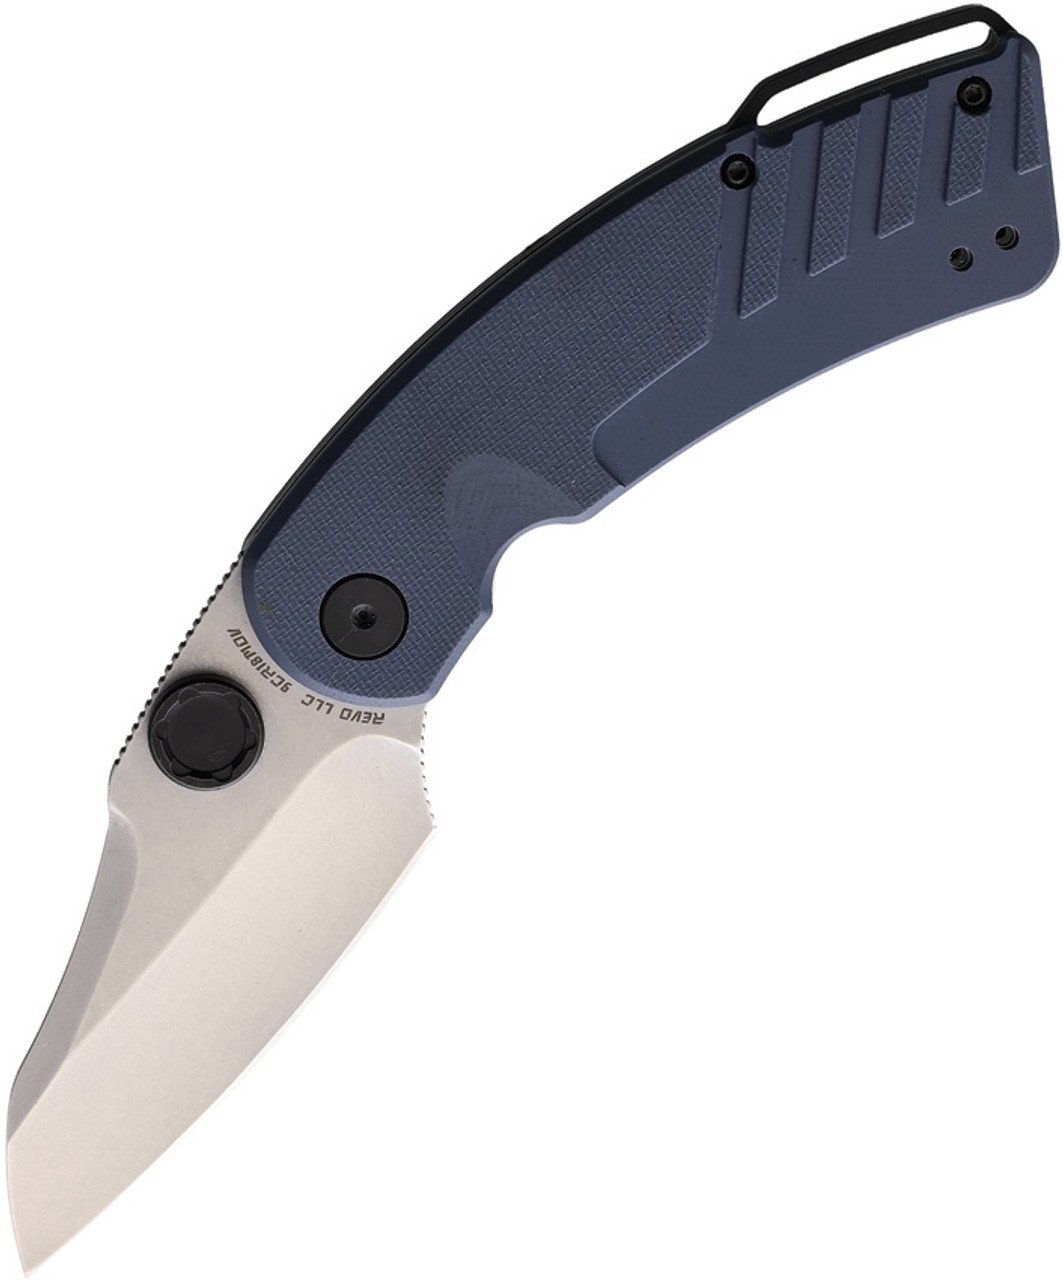 Revo Warden 2 Gray G10 Handle Assisted Opening Knife